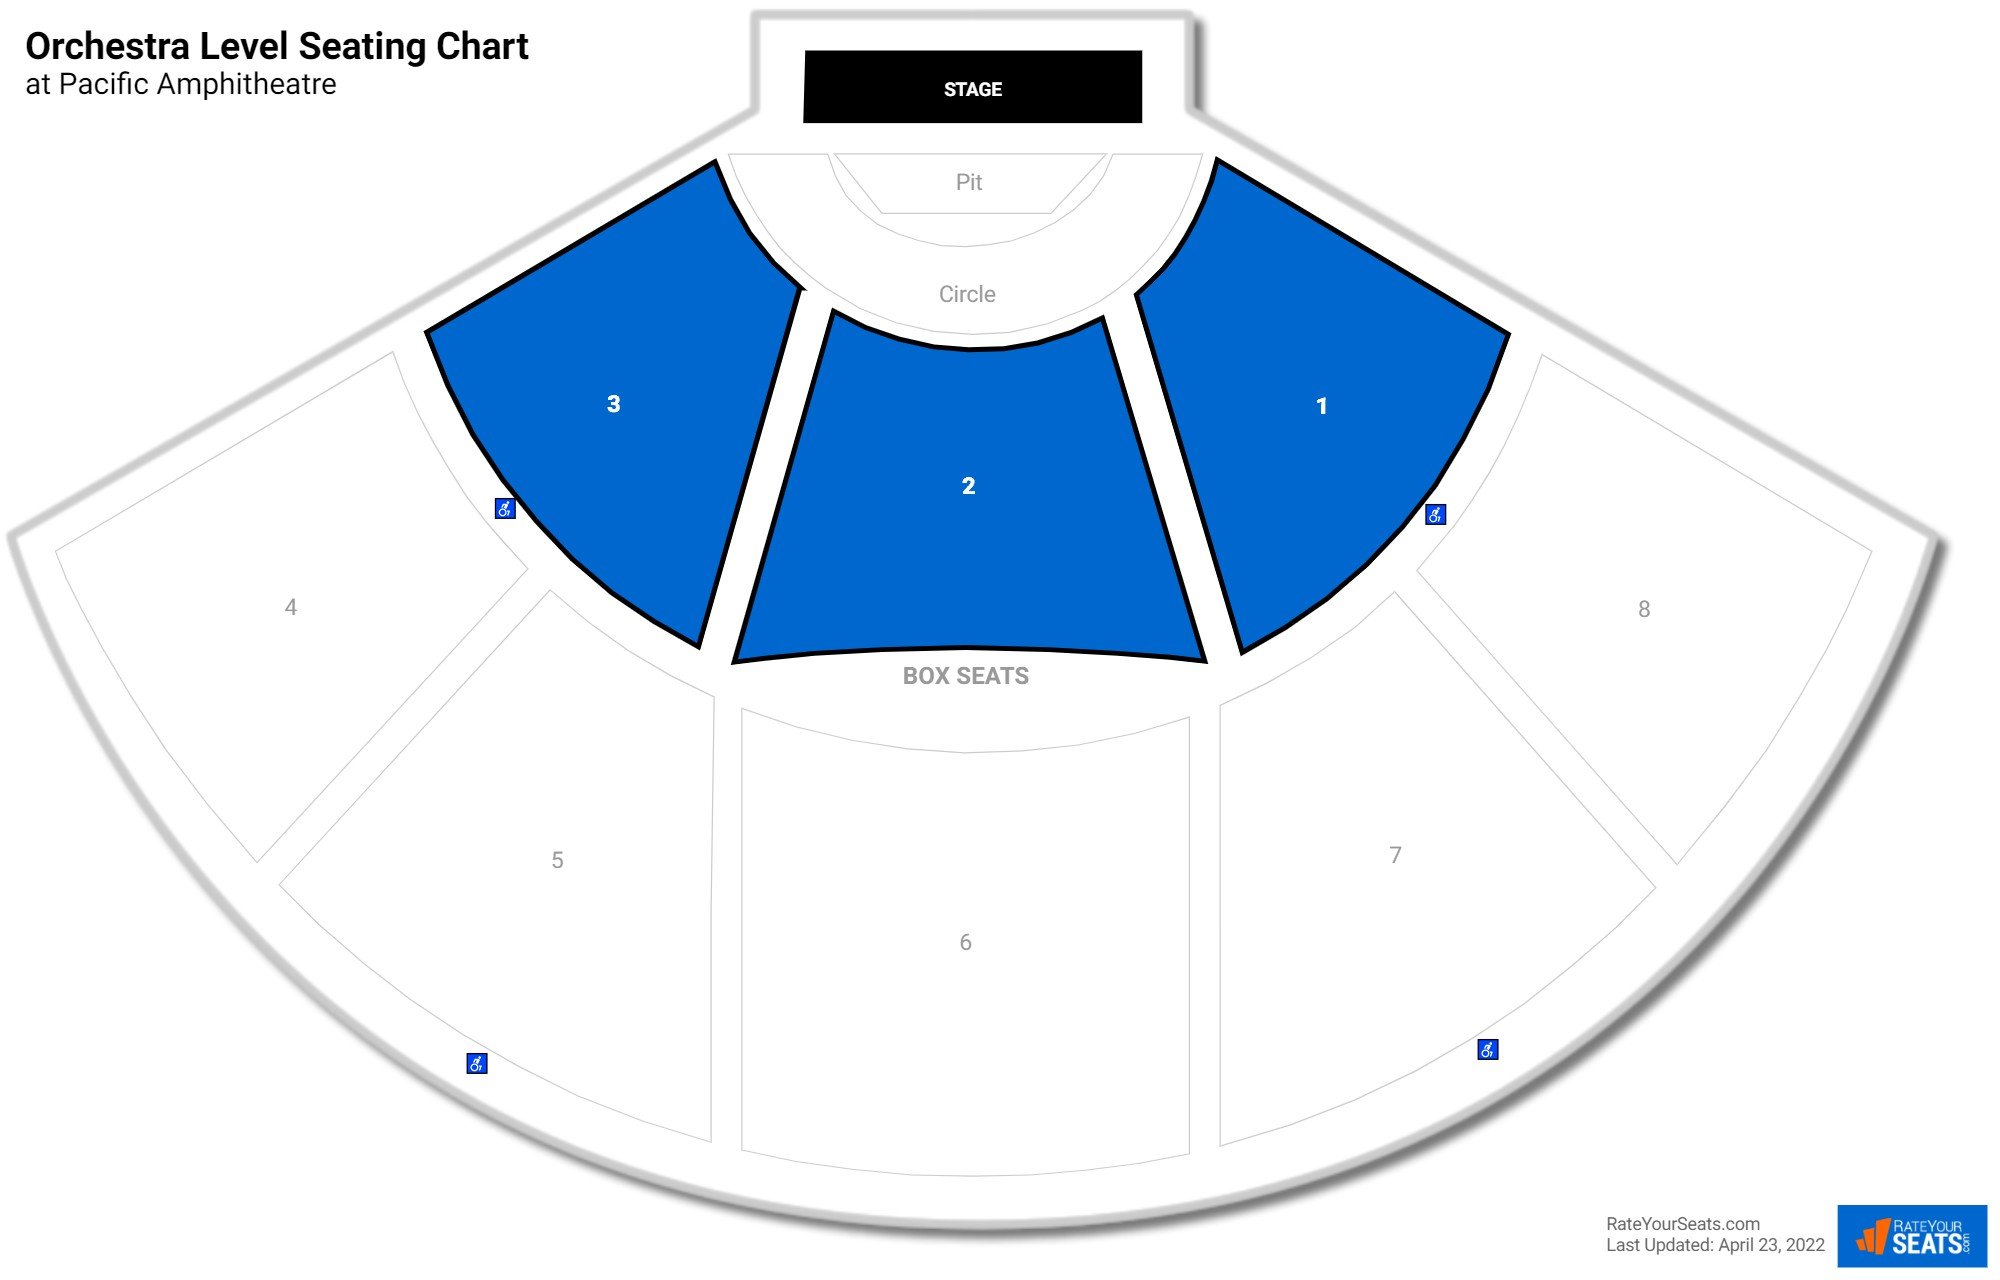 Concert Orchestra Level Seating Chart at Pacific Amphitheatre